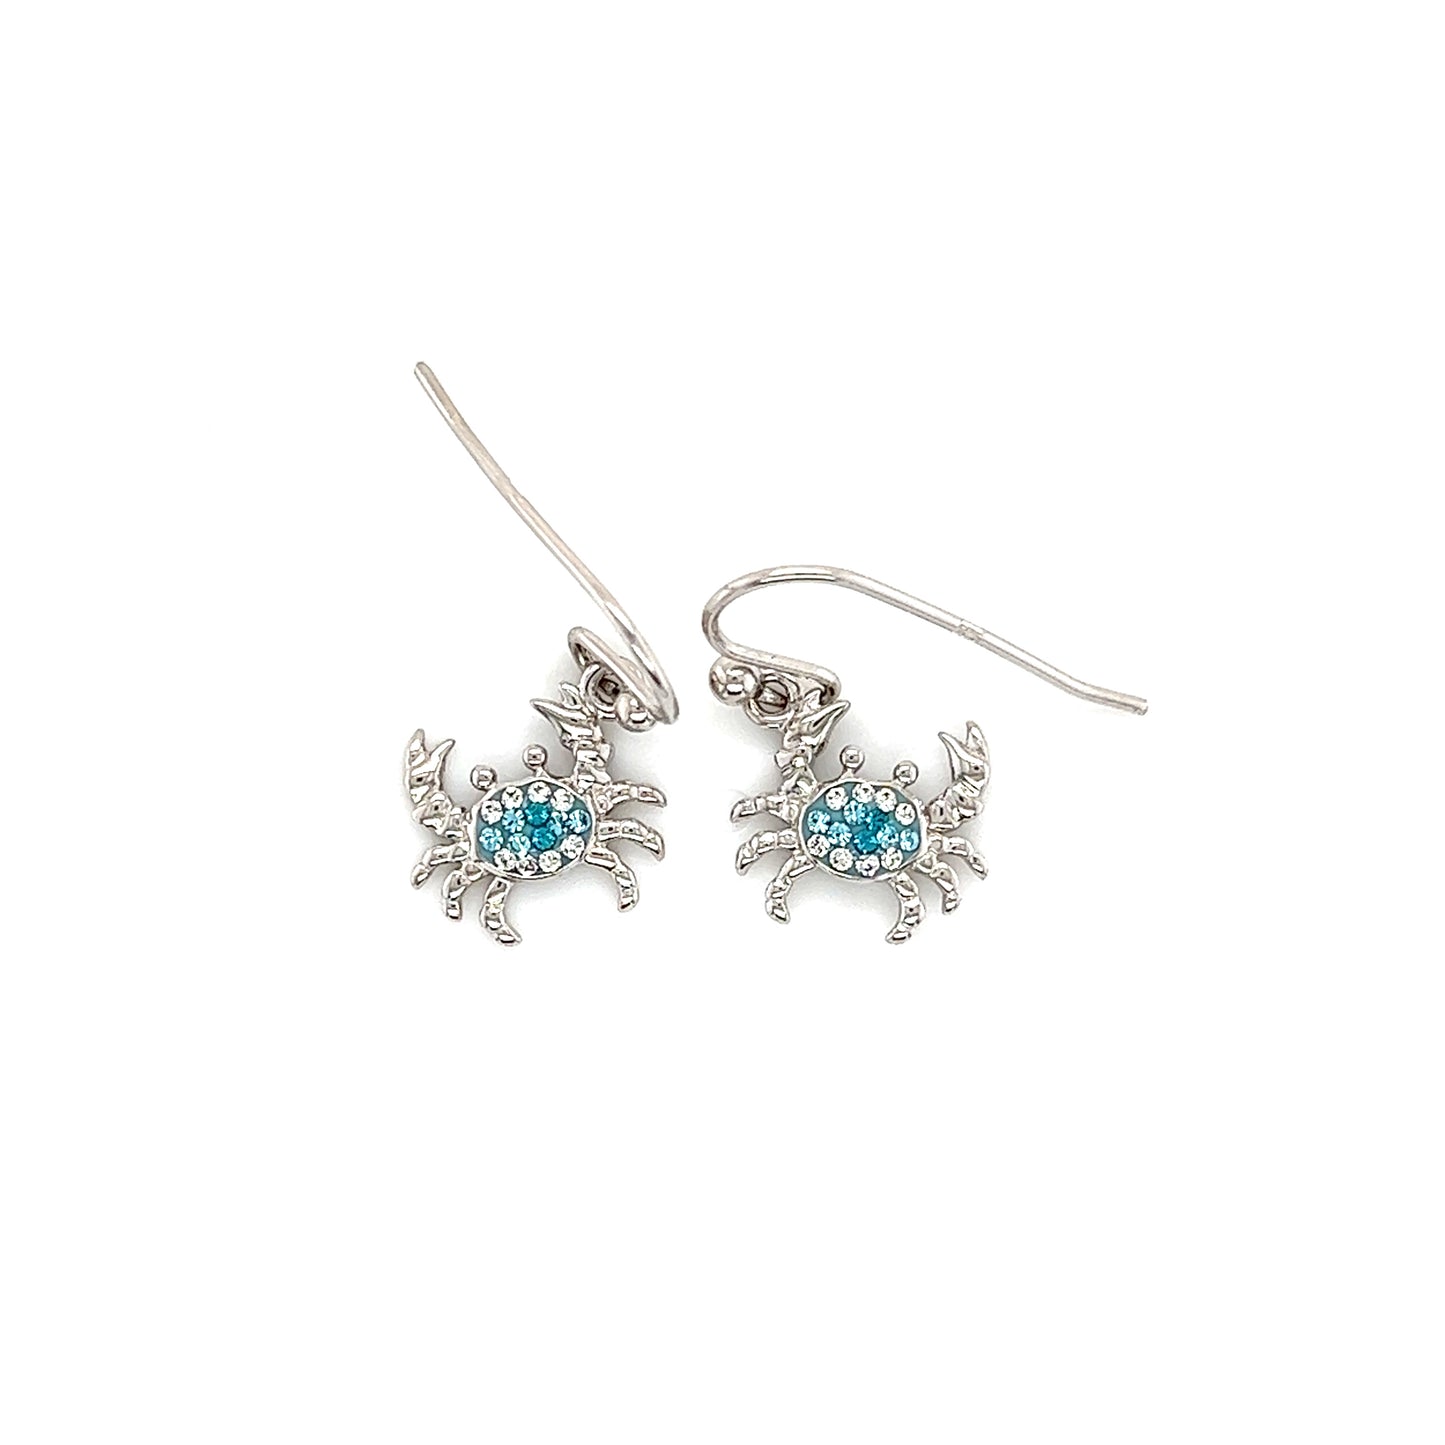 Blue Crab Dangle Earrings with Aqua and White Crystals in Sterling Silver Top View